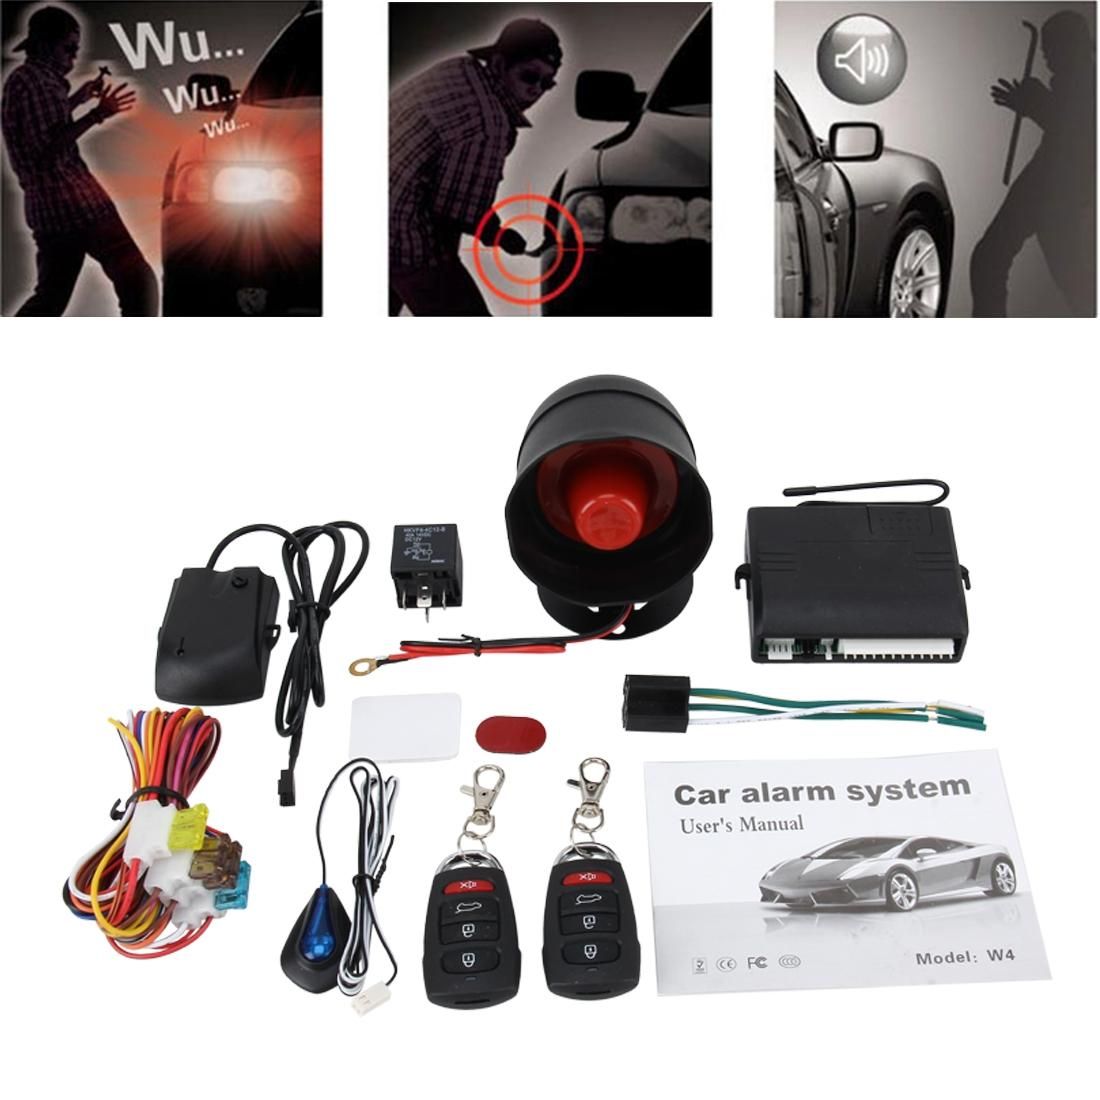 Car Safety Warning Alarm System Car Alarm Security System with Two Remote Controls, DC 12V